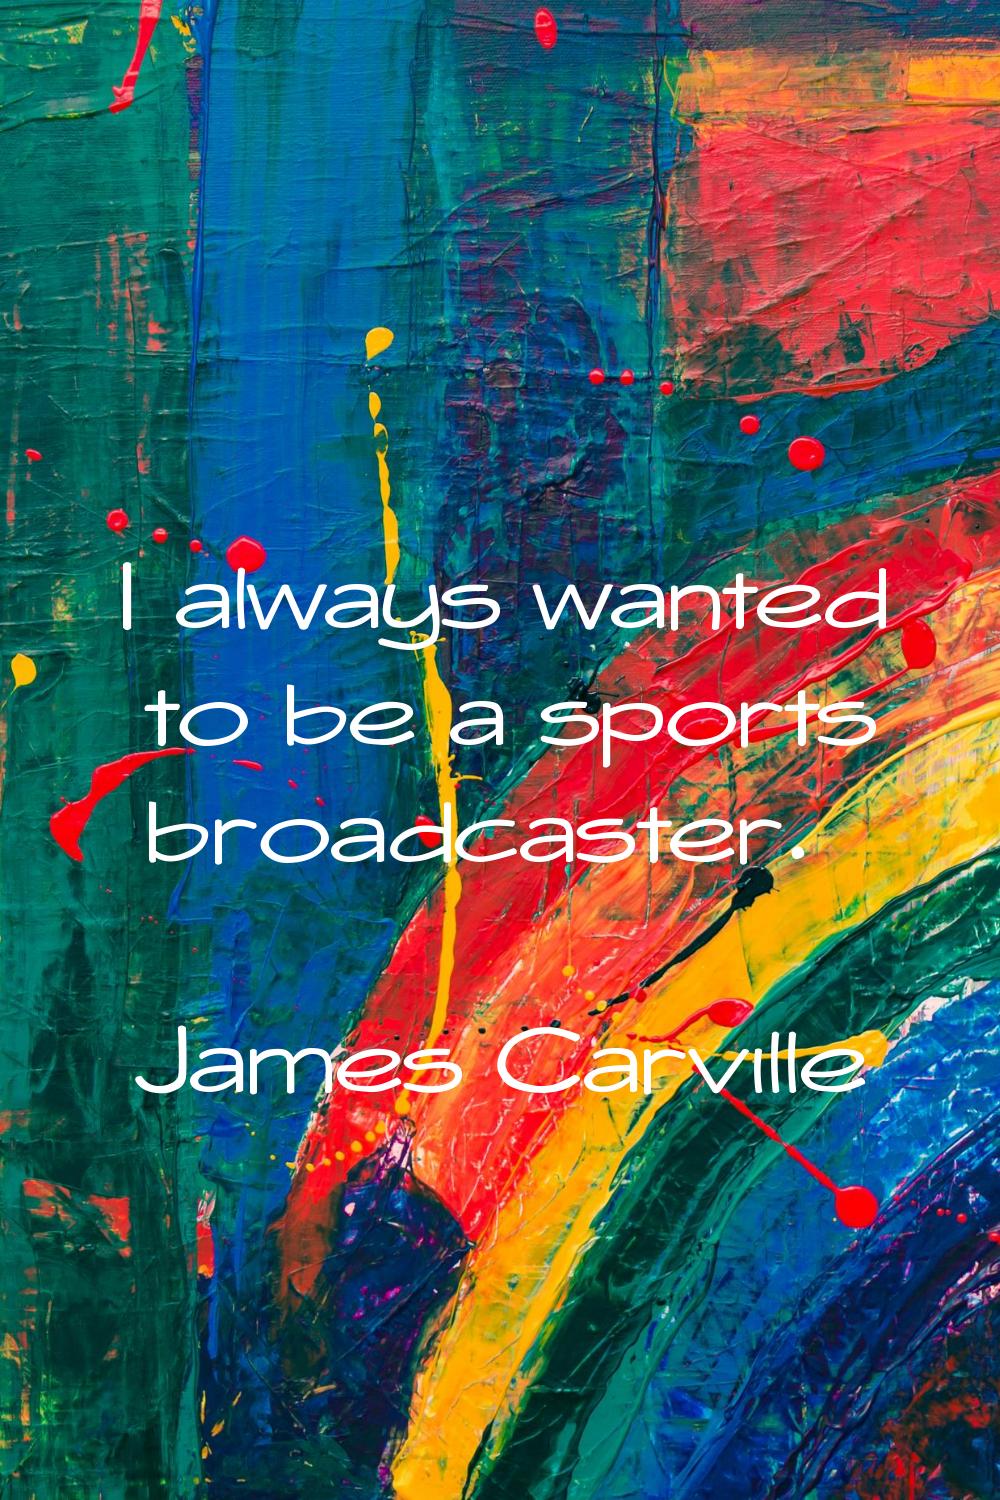 I always wanted to be a sports broadcaster.